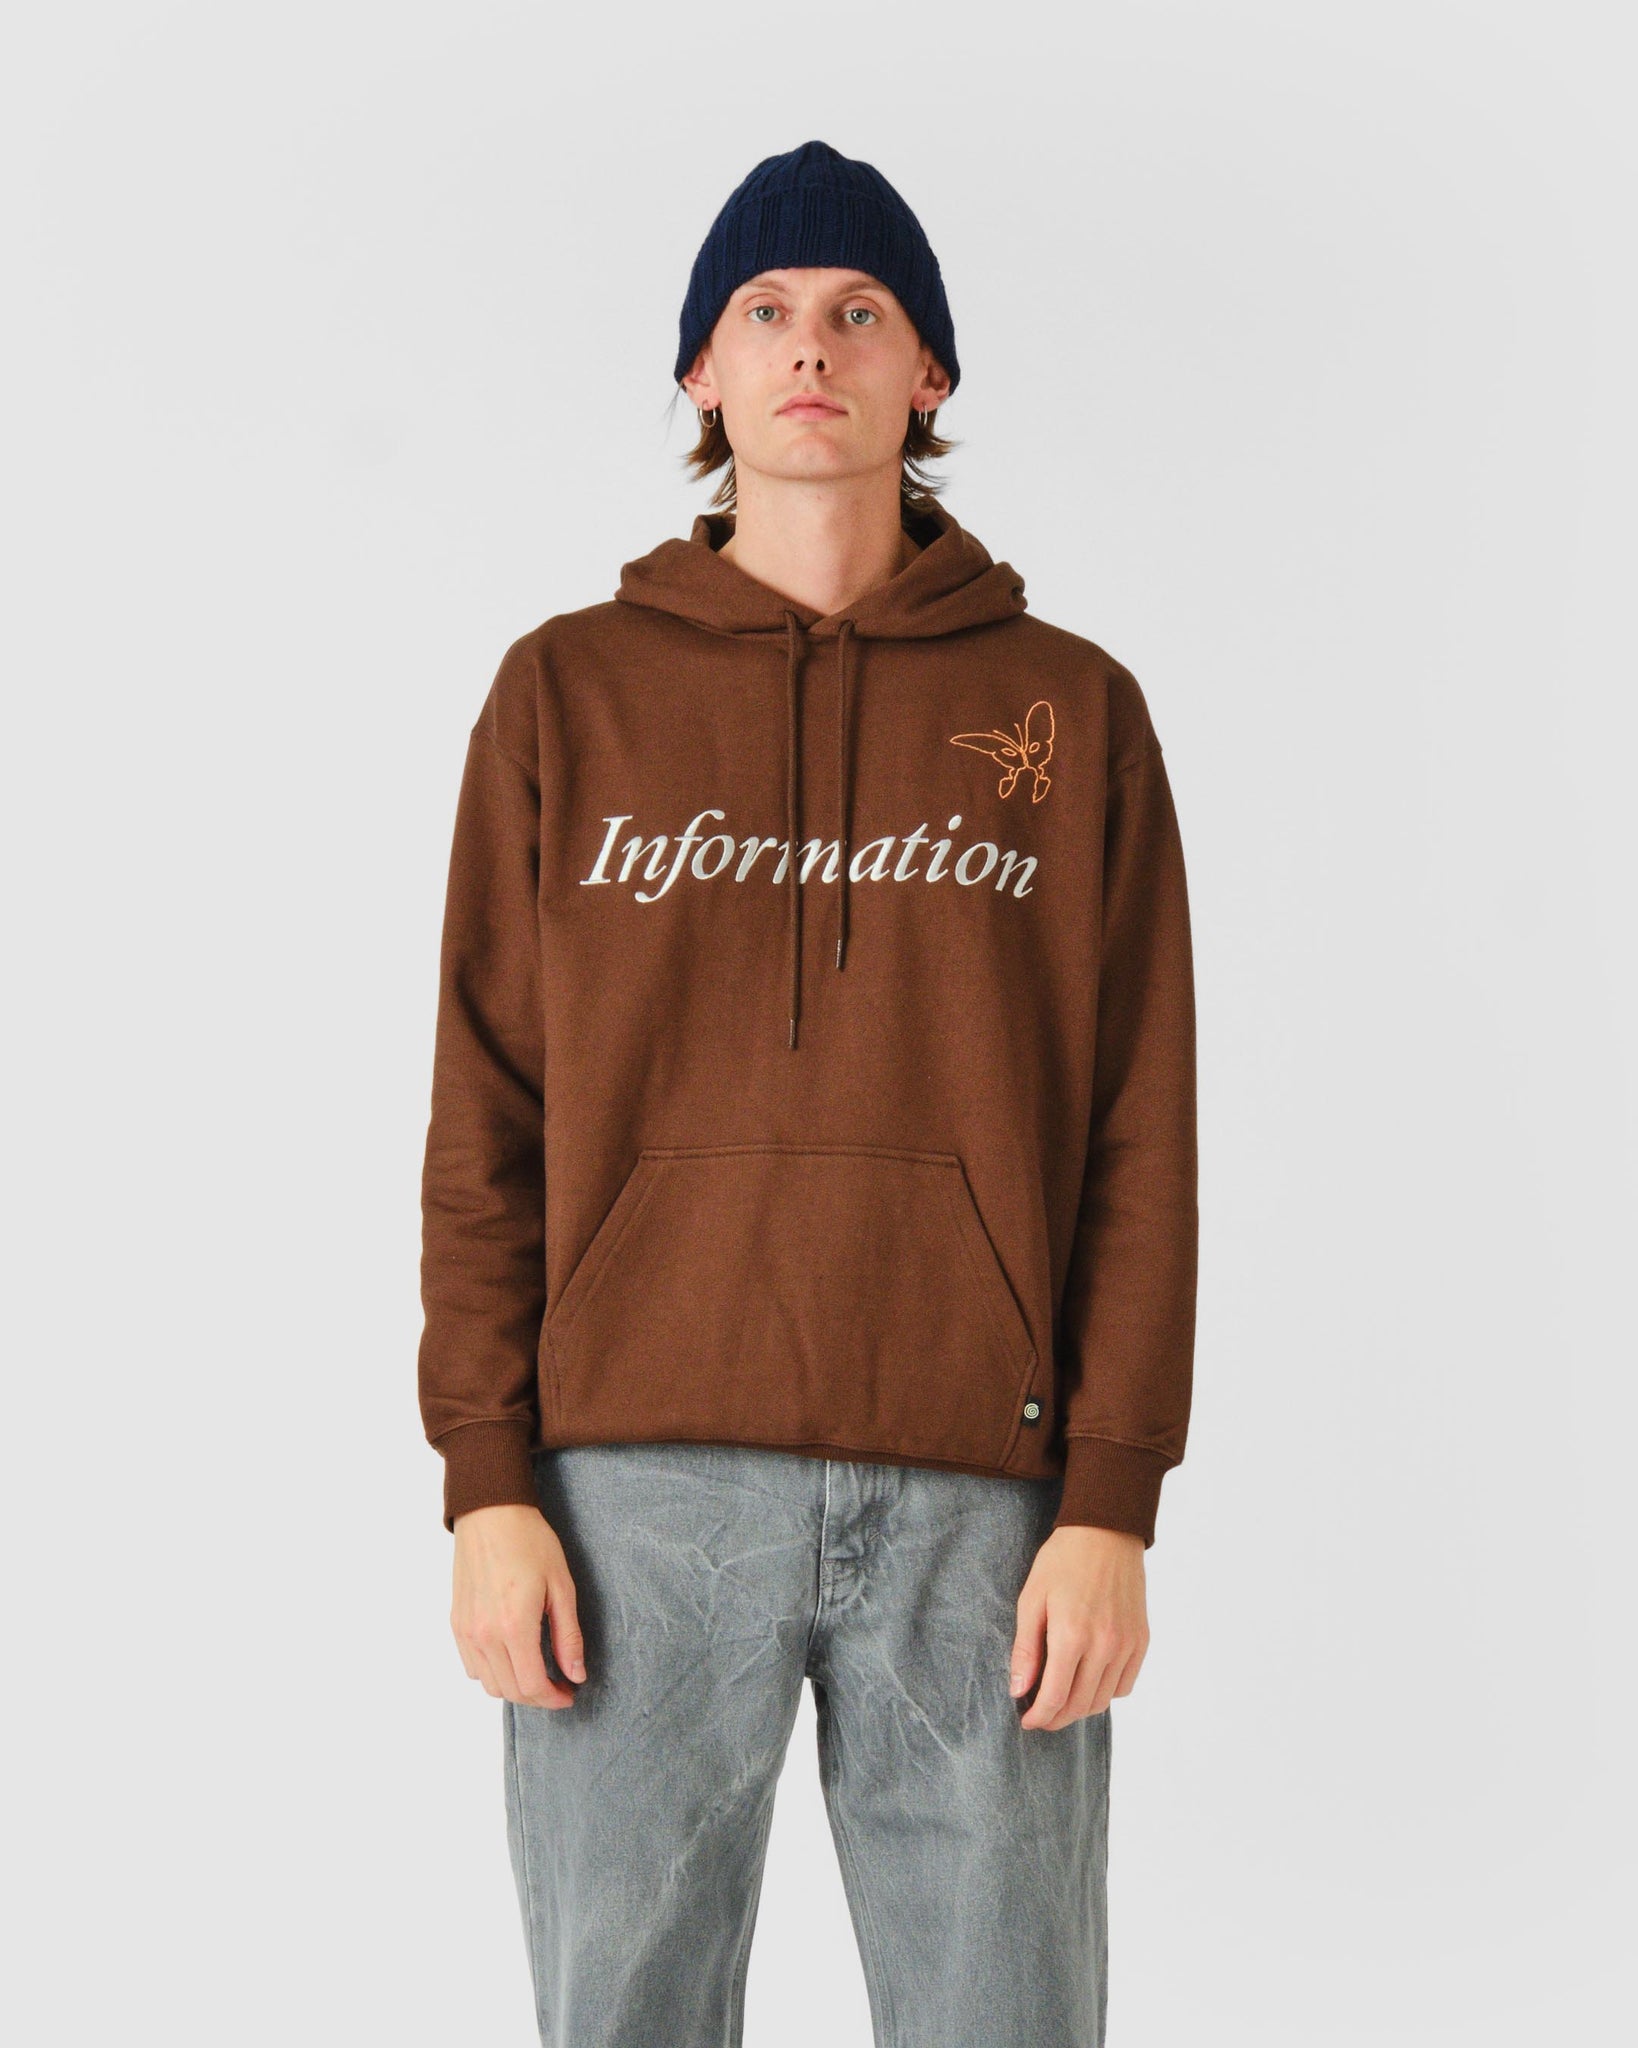 Information Hooded Sweat - Dirt